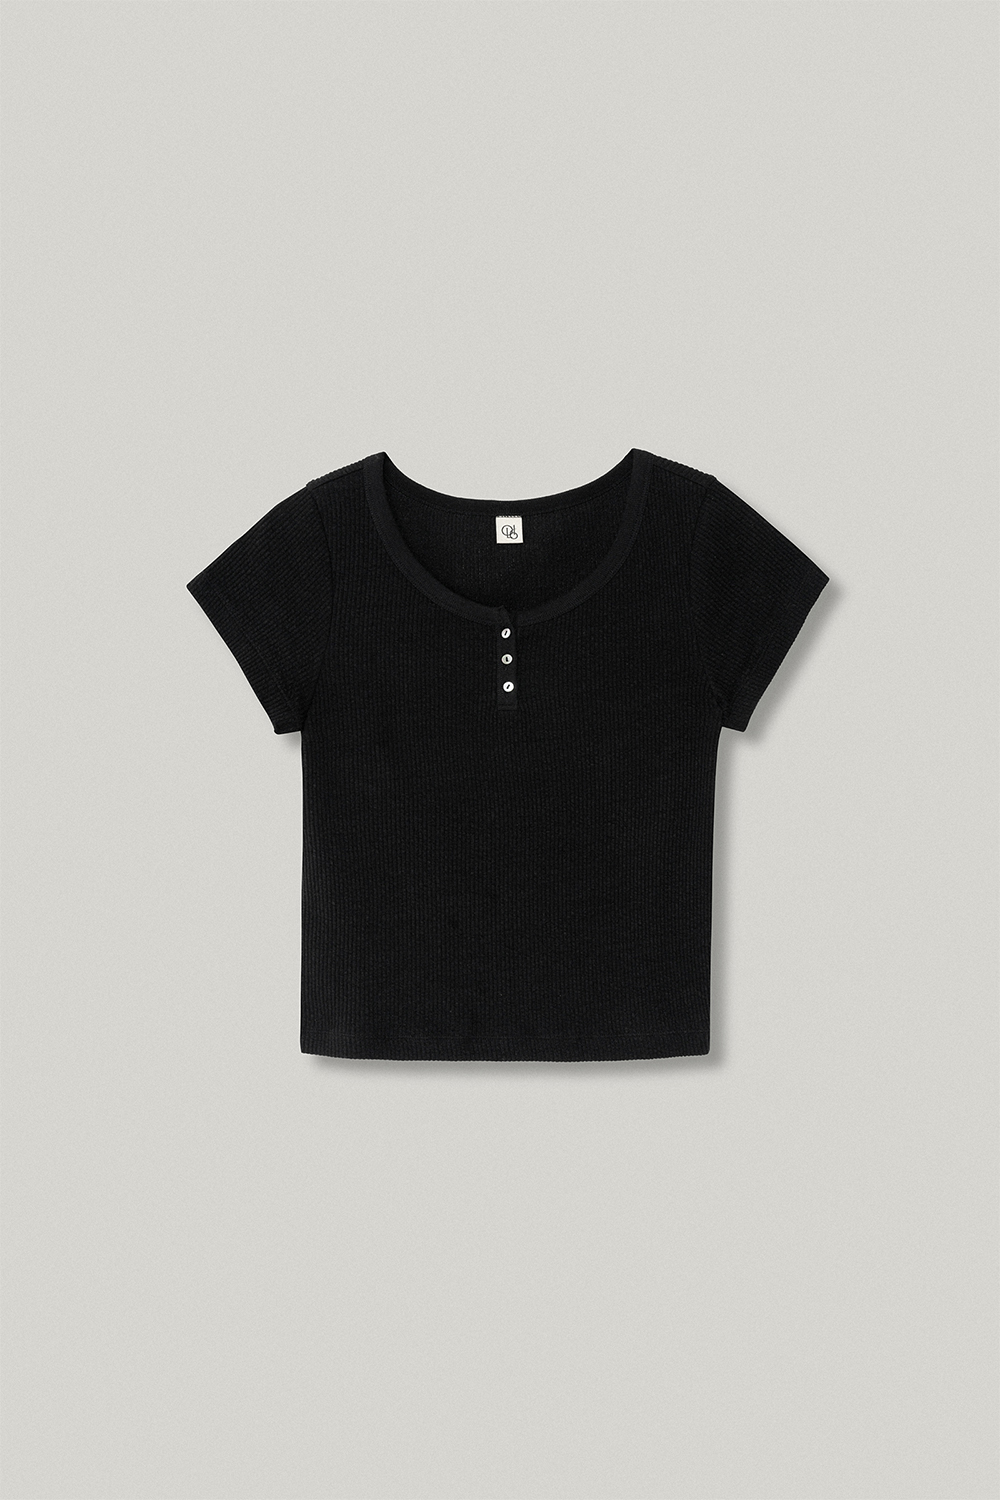 [4 REORDER] Lis Button Top in Black